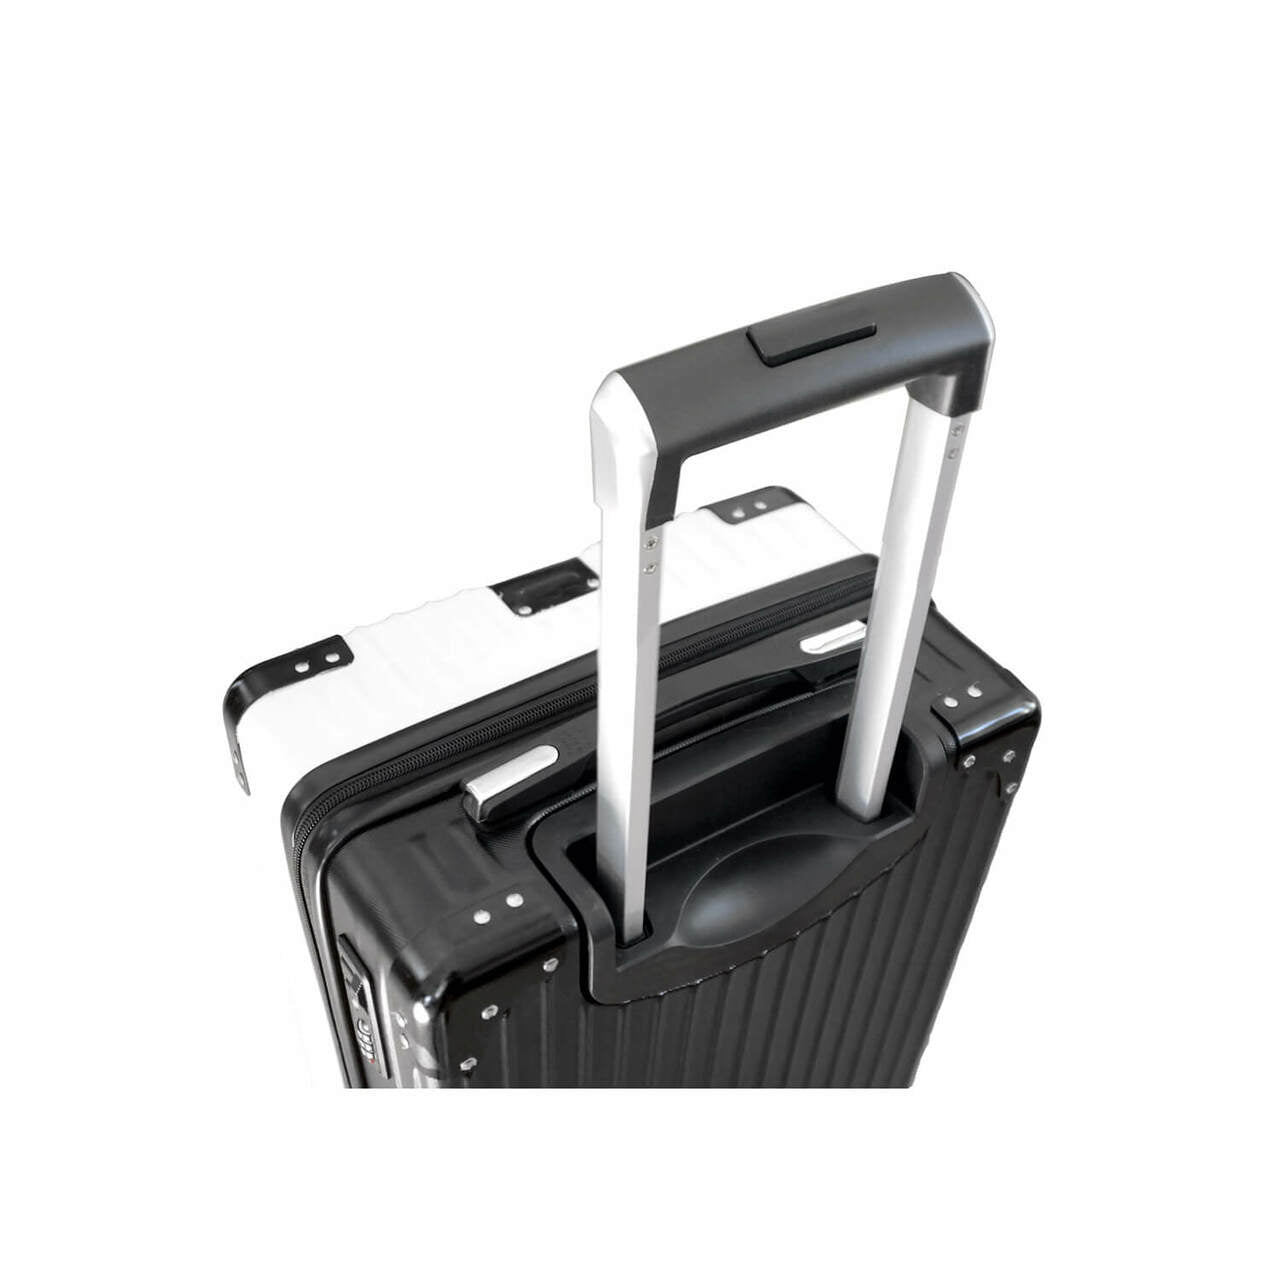 Tennessee Titans Carry-On Hardcase Spinner Luggage